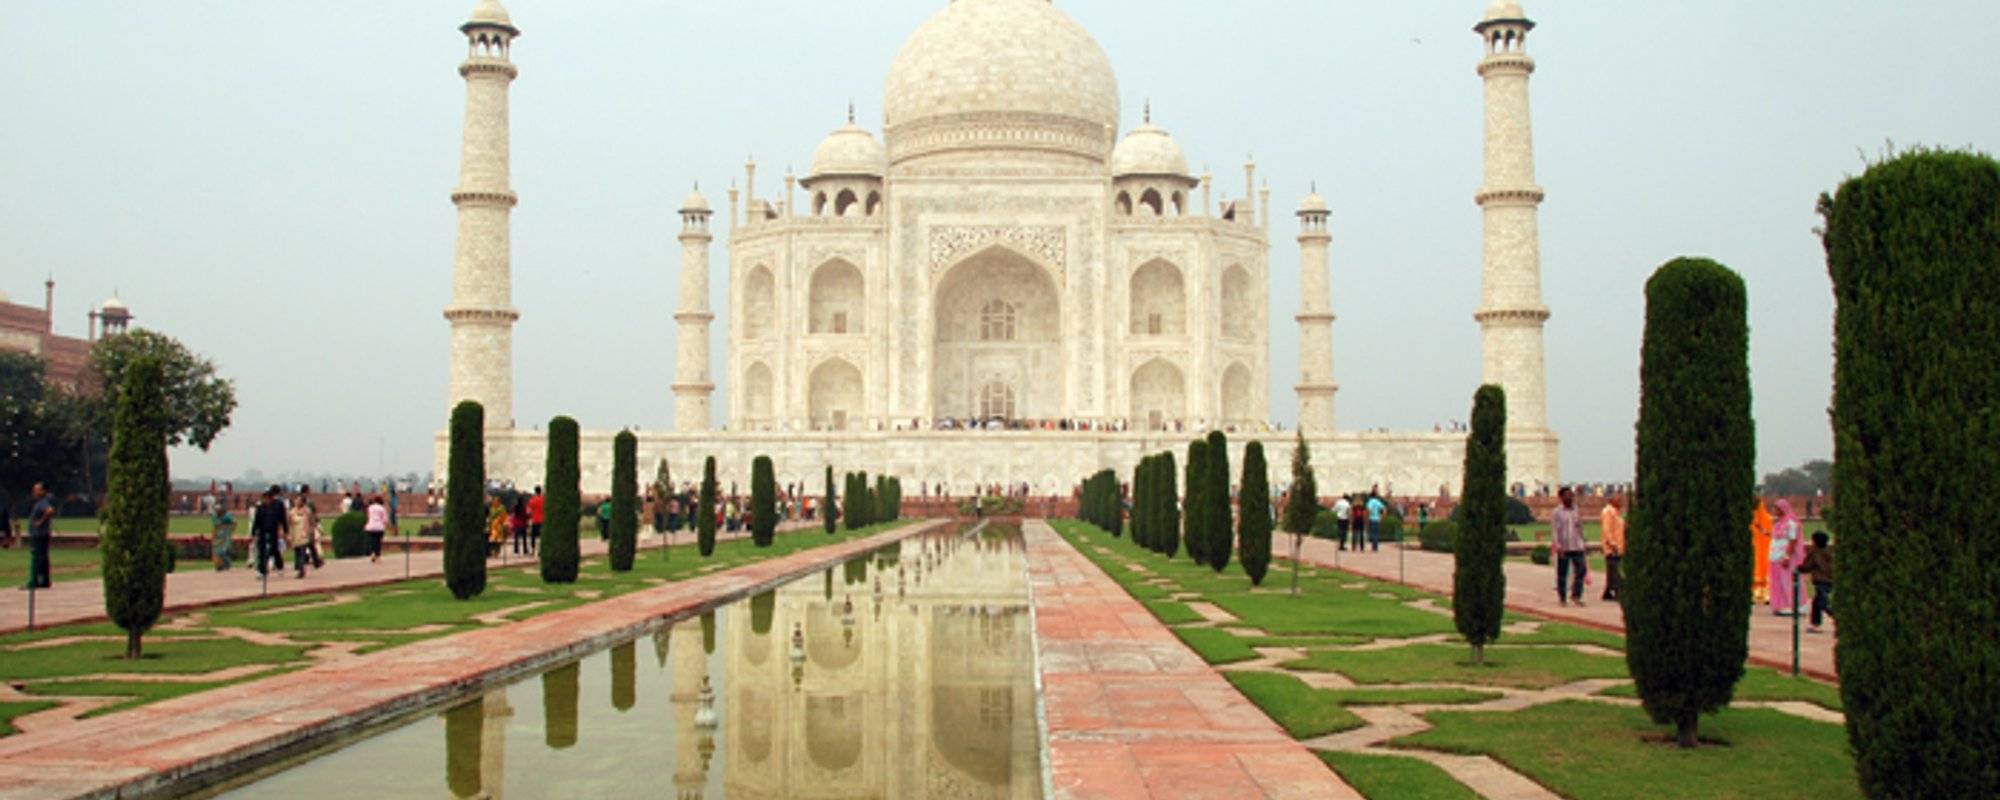 INDIA - Spend three days in Agra and get a taste of India